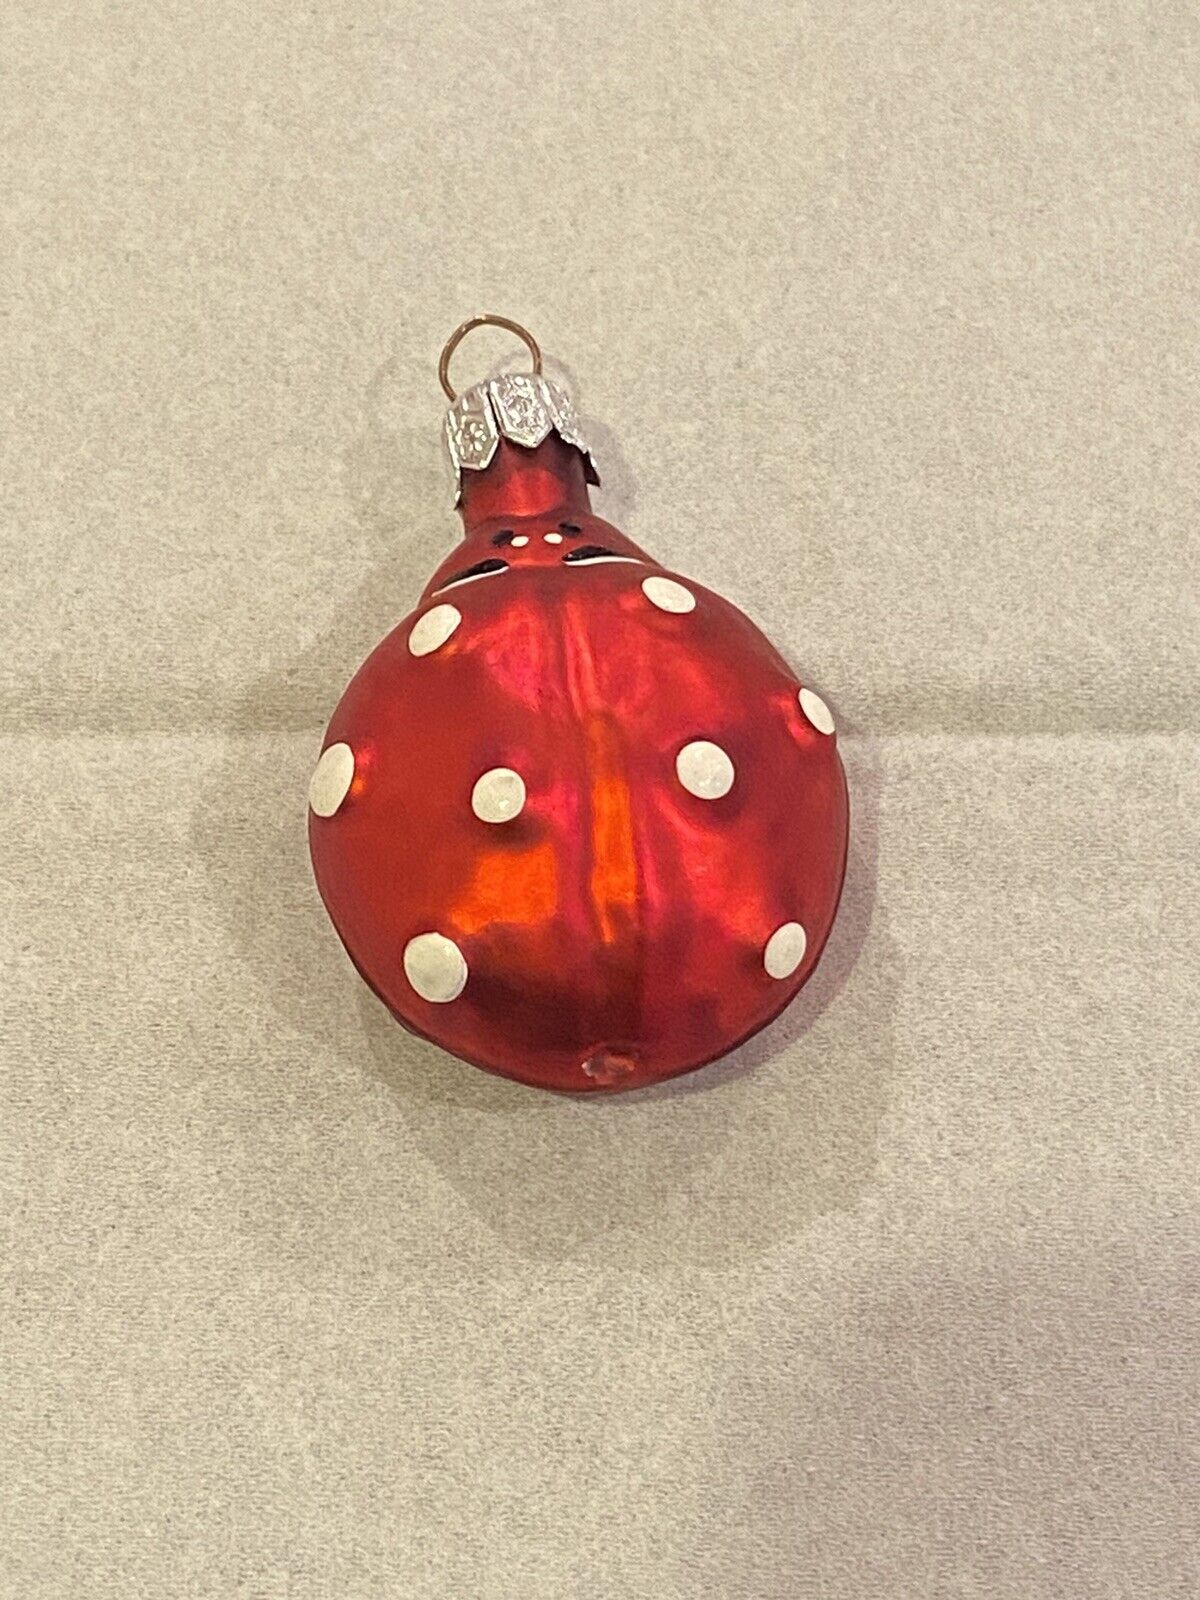 Vtg Patricia Breen? Hand Painted Ladybug Ornament Red Christmas